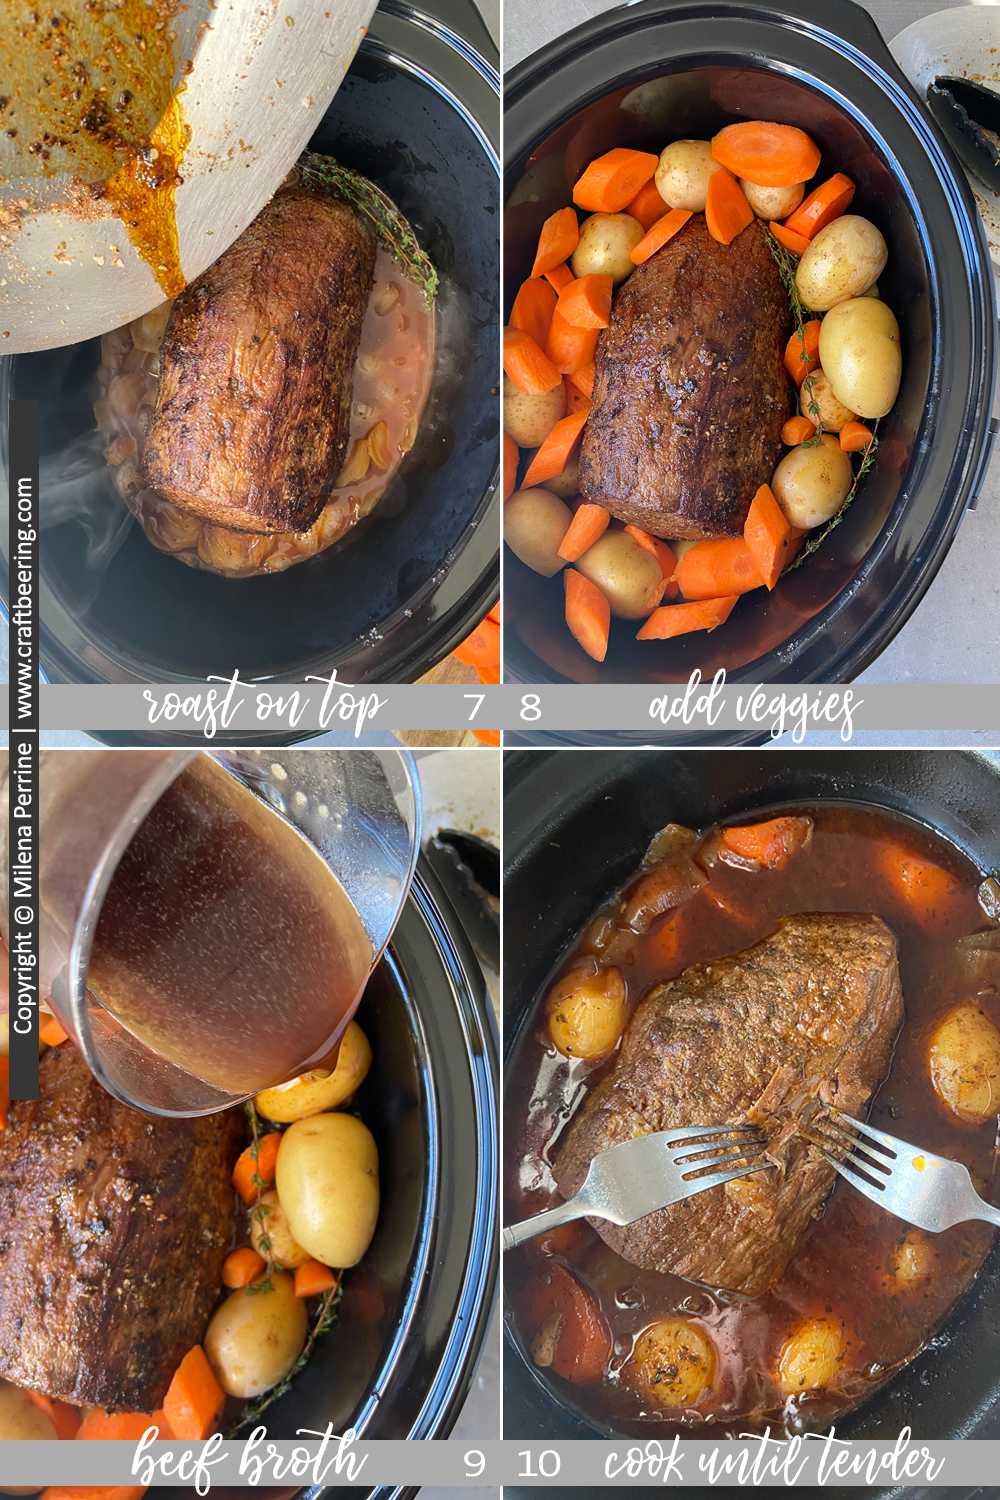 Steps to cook eye of round roast crock pot style.